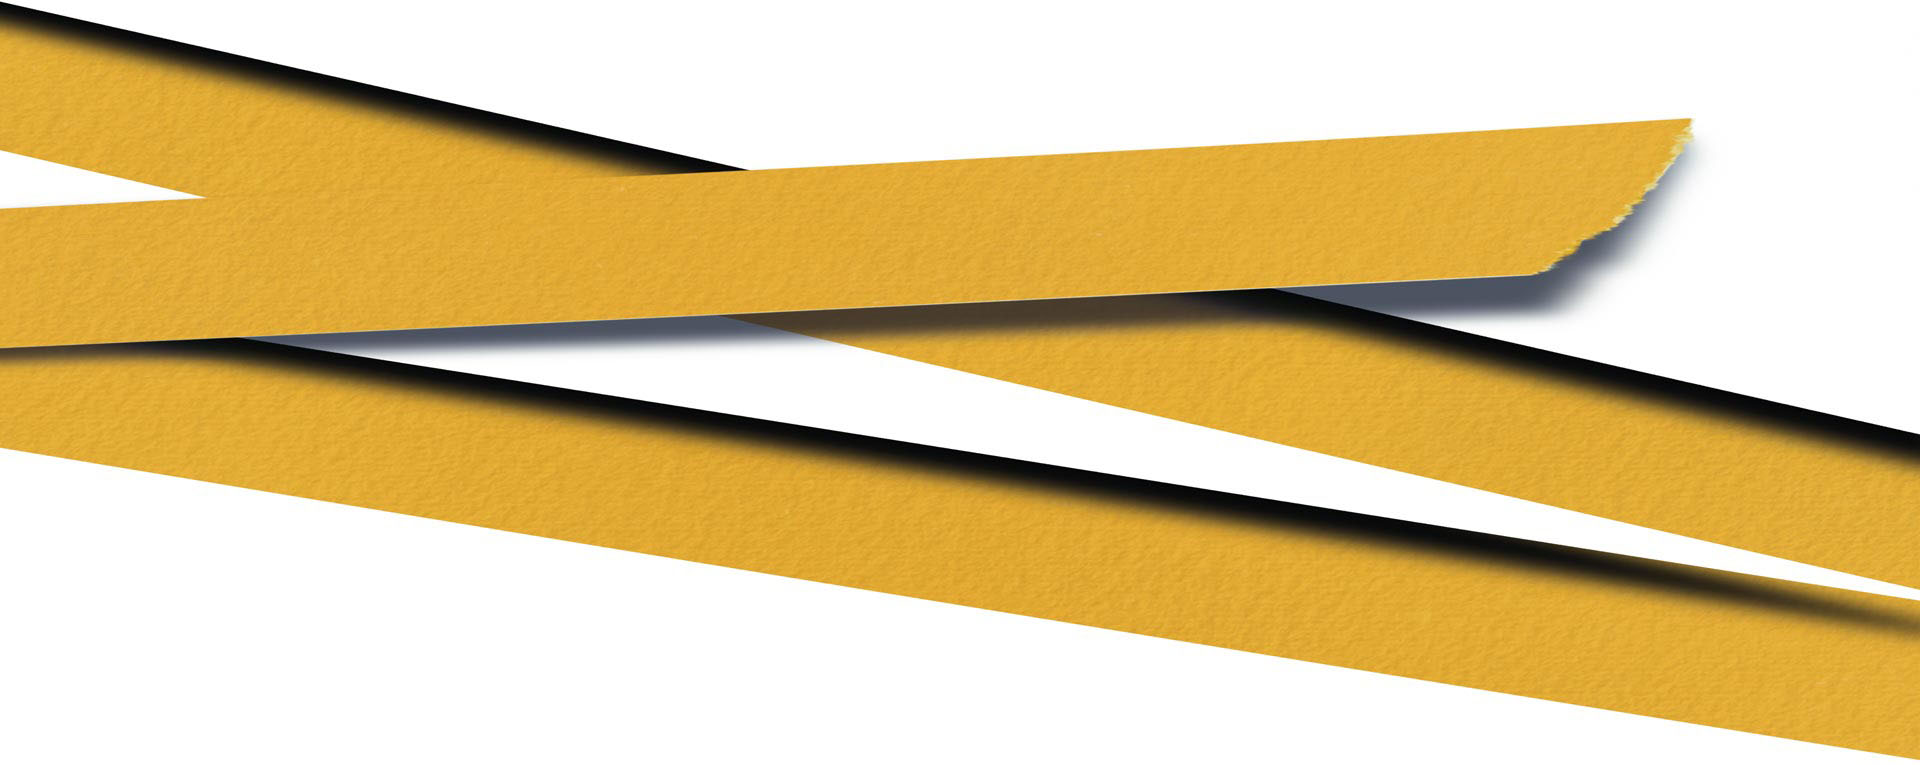 Layers of paper overlapping yellow strips that look like police tape.